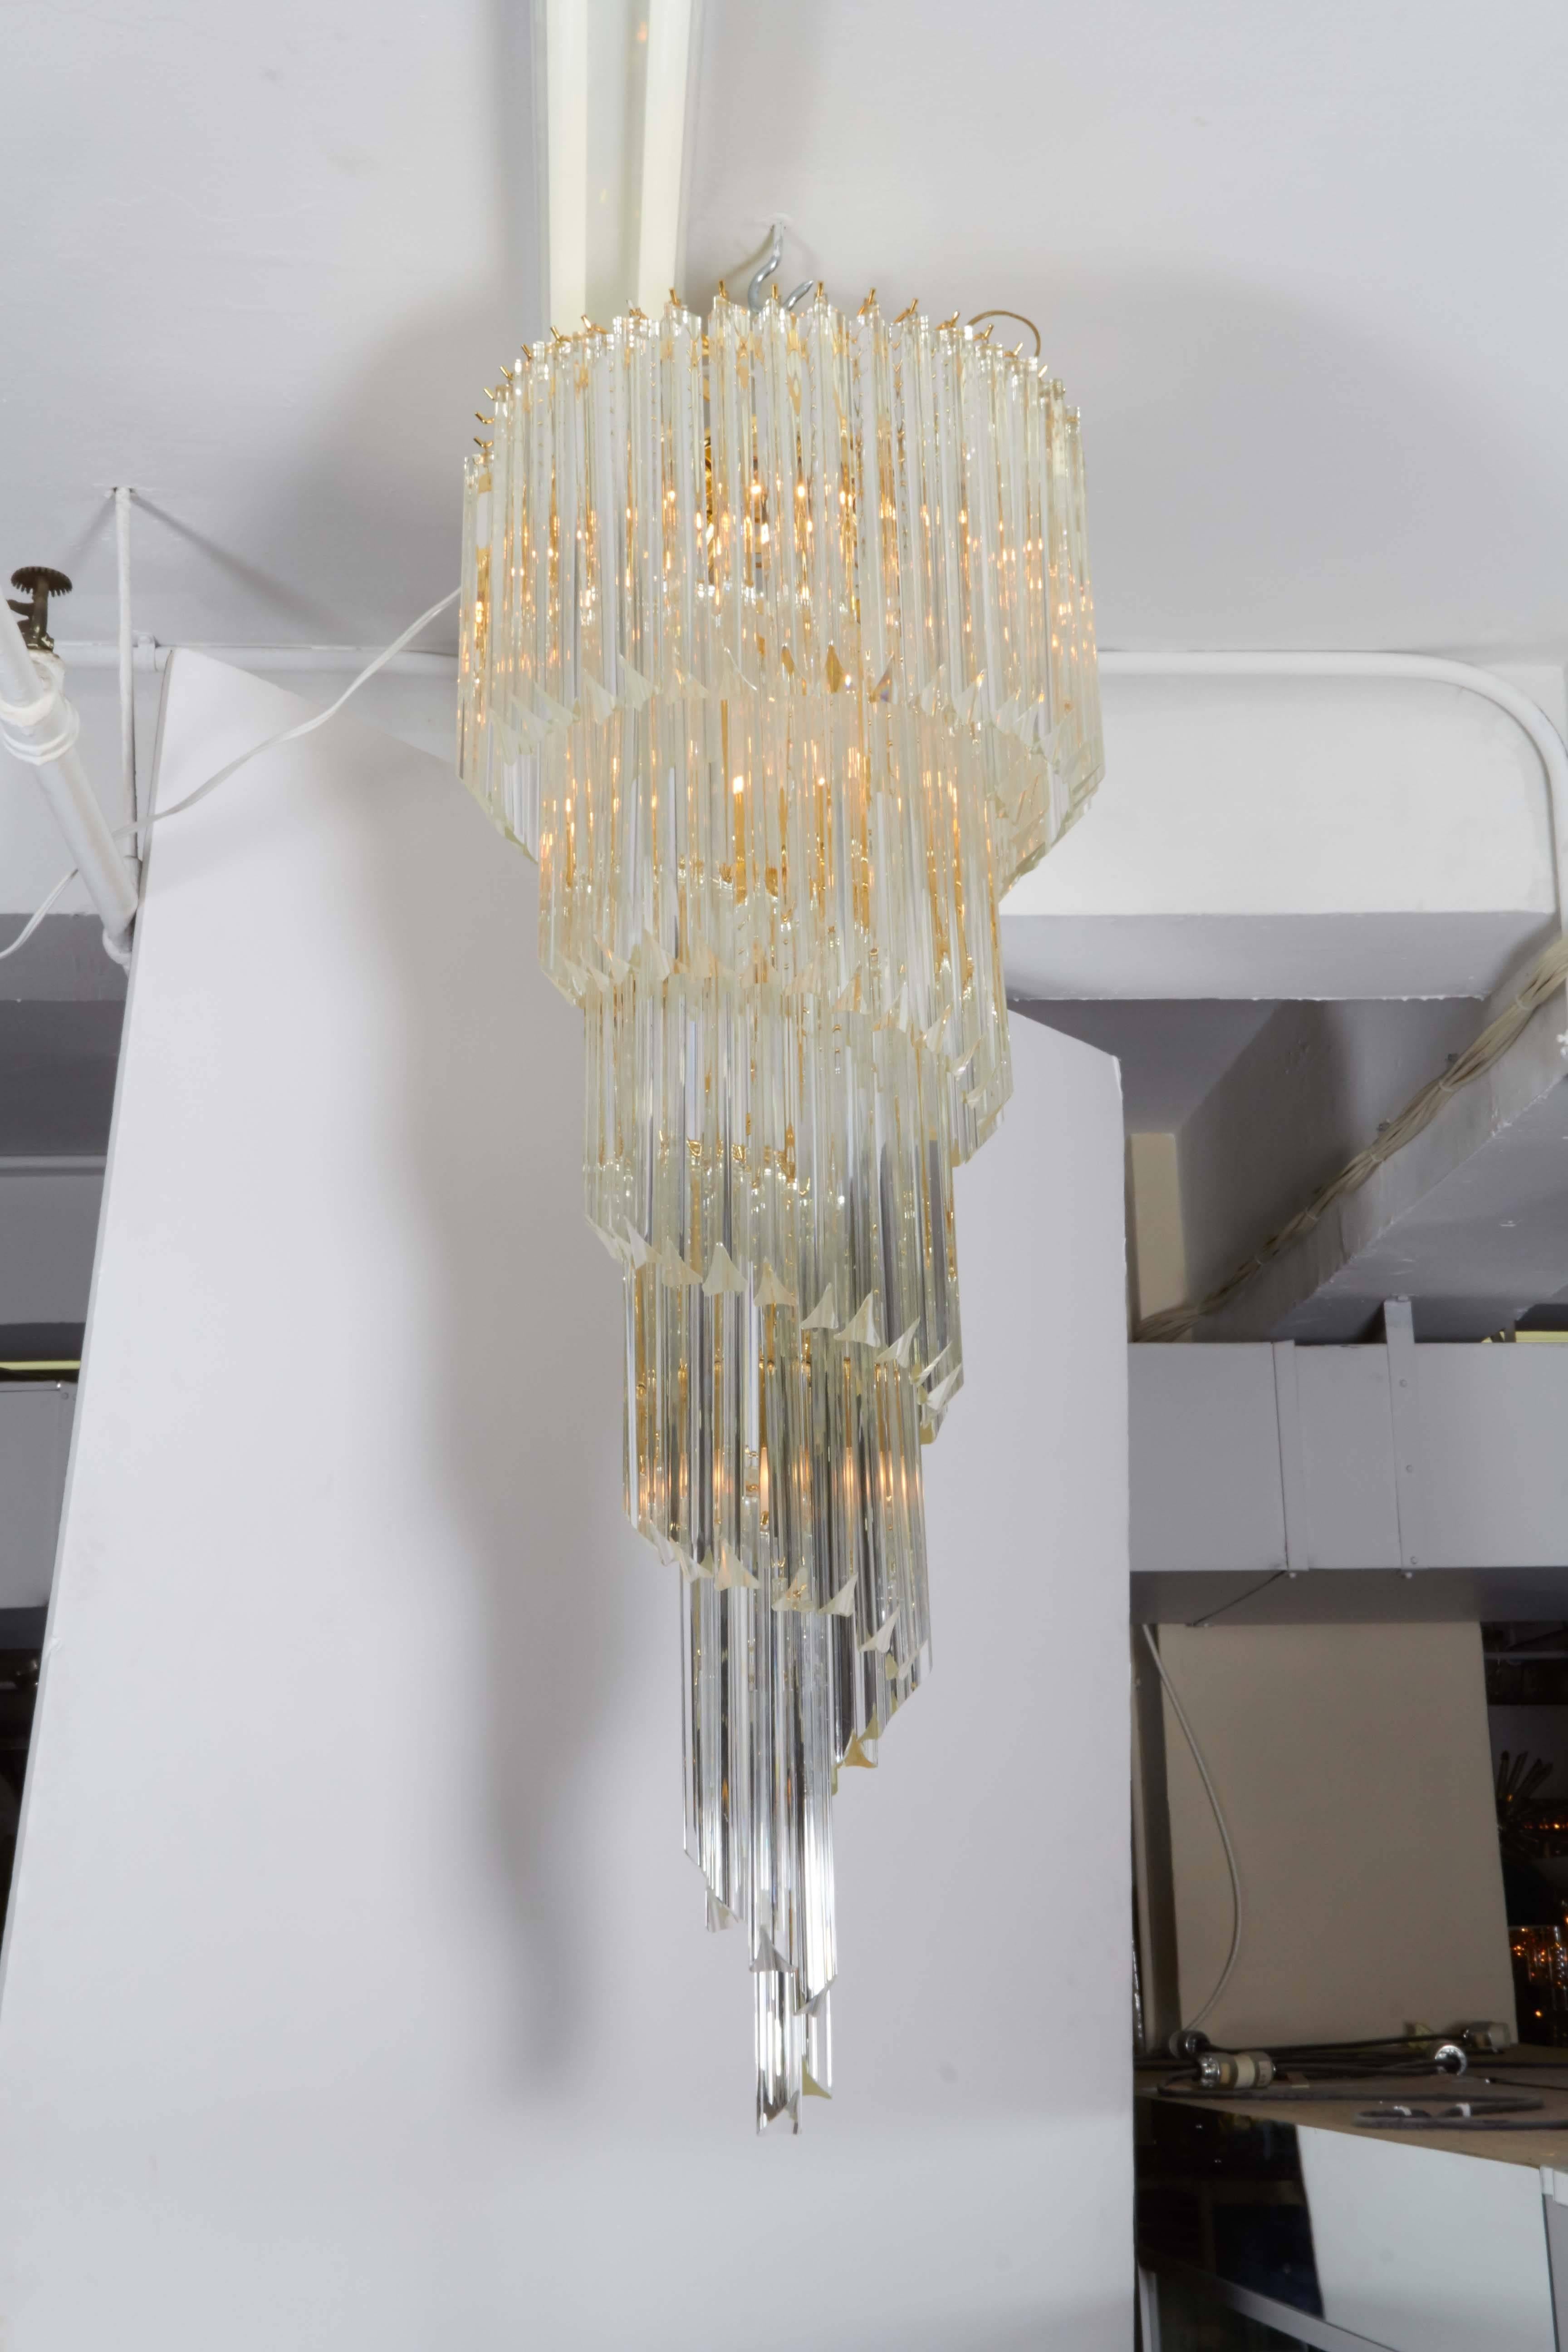 An impressive large scale chandelier, surrounded triedri crystal prisms, spiraling down from a four tier frame in brass. This fixture remains in very good condition, minor wear to metal and minuscule chips to prisms consistent with age and